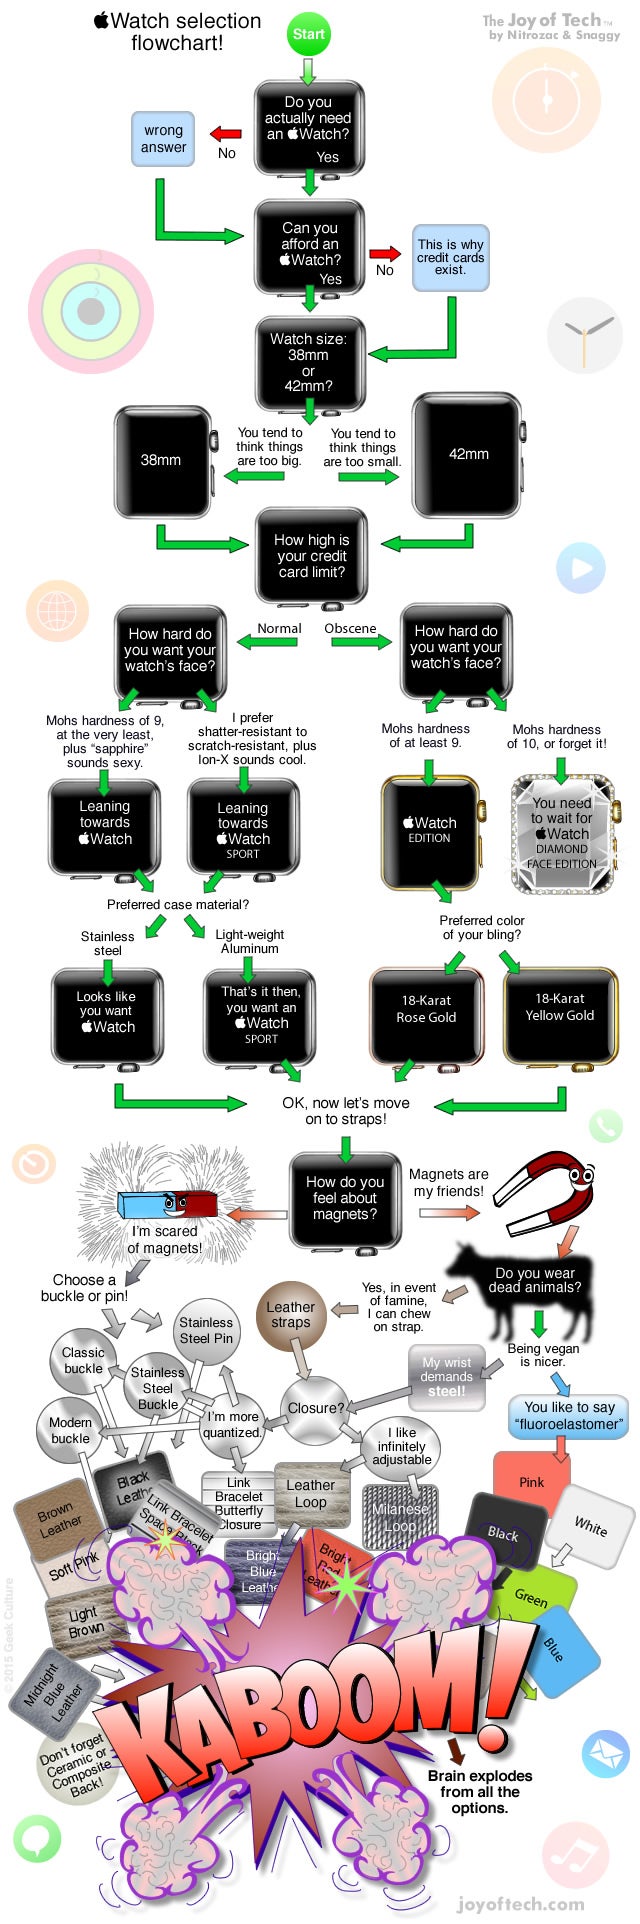 Humor: Flow chart provides a simple decision guide to determine if you should really get the Apple Watch